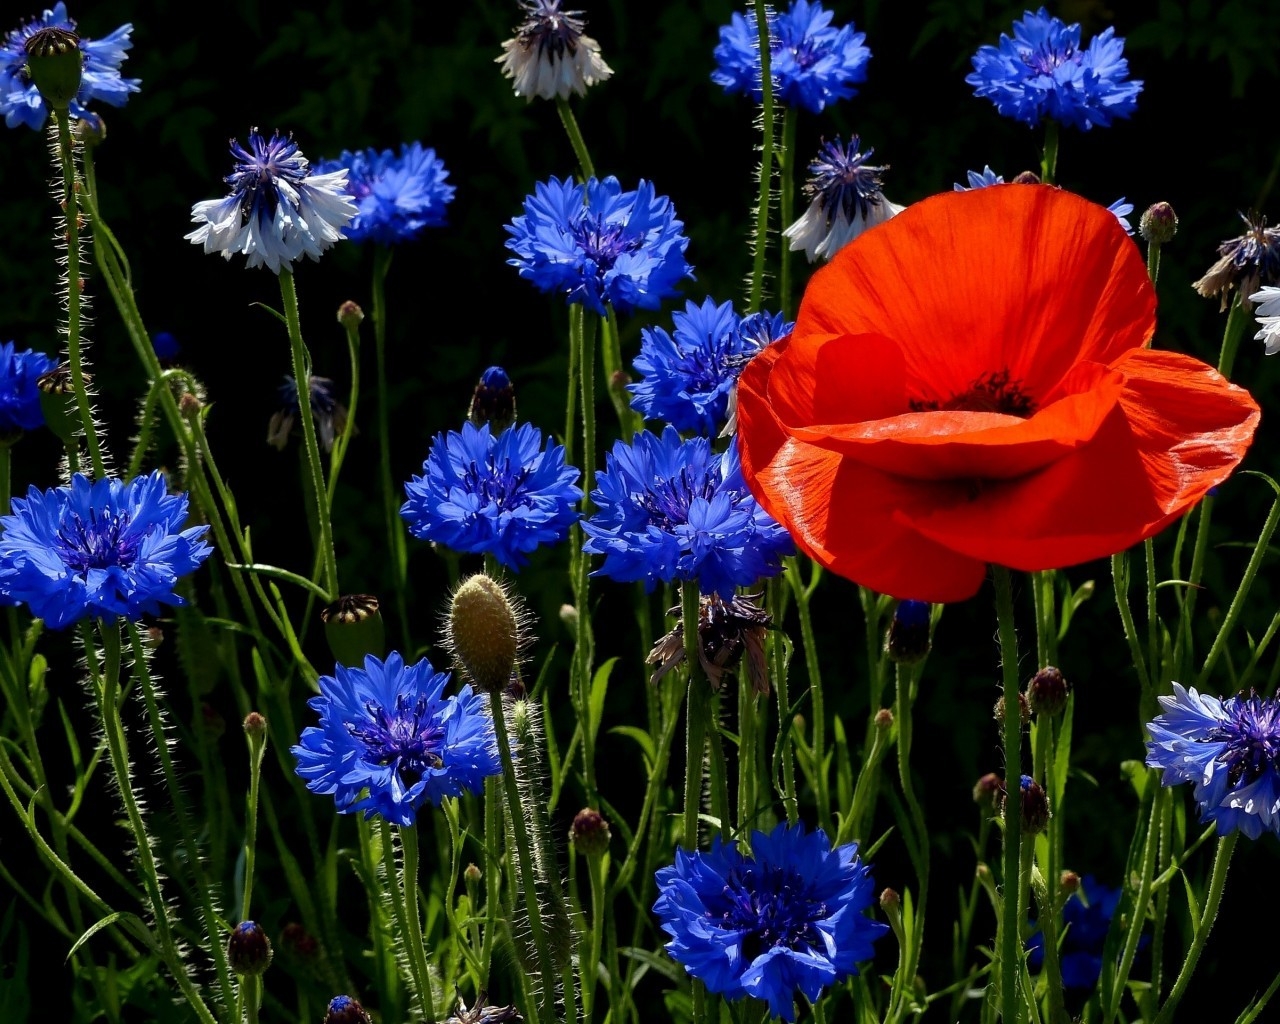 Poppies and Cornflowers for 1280 x 1024 resolution